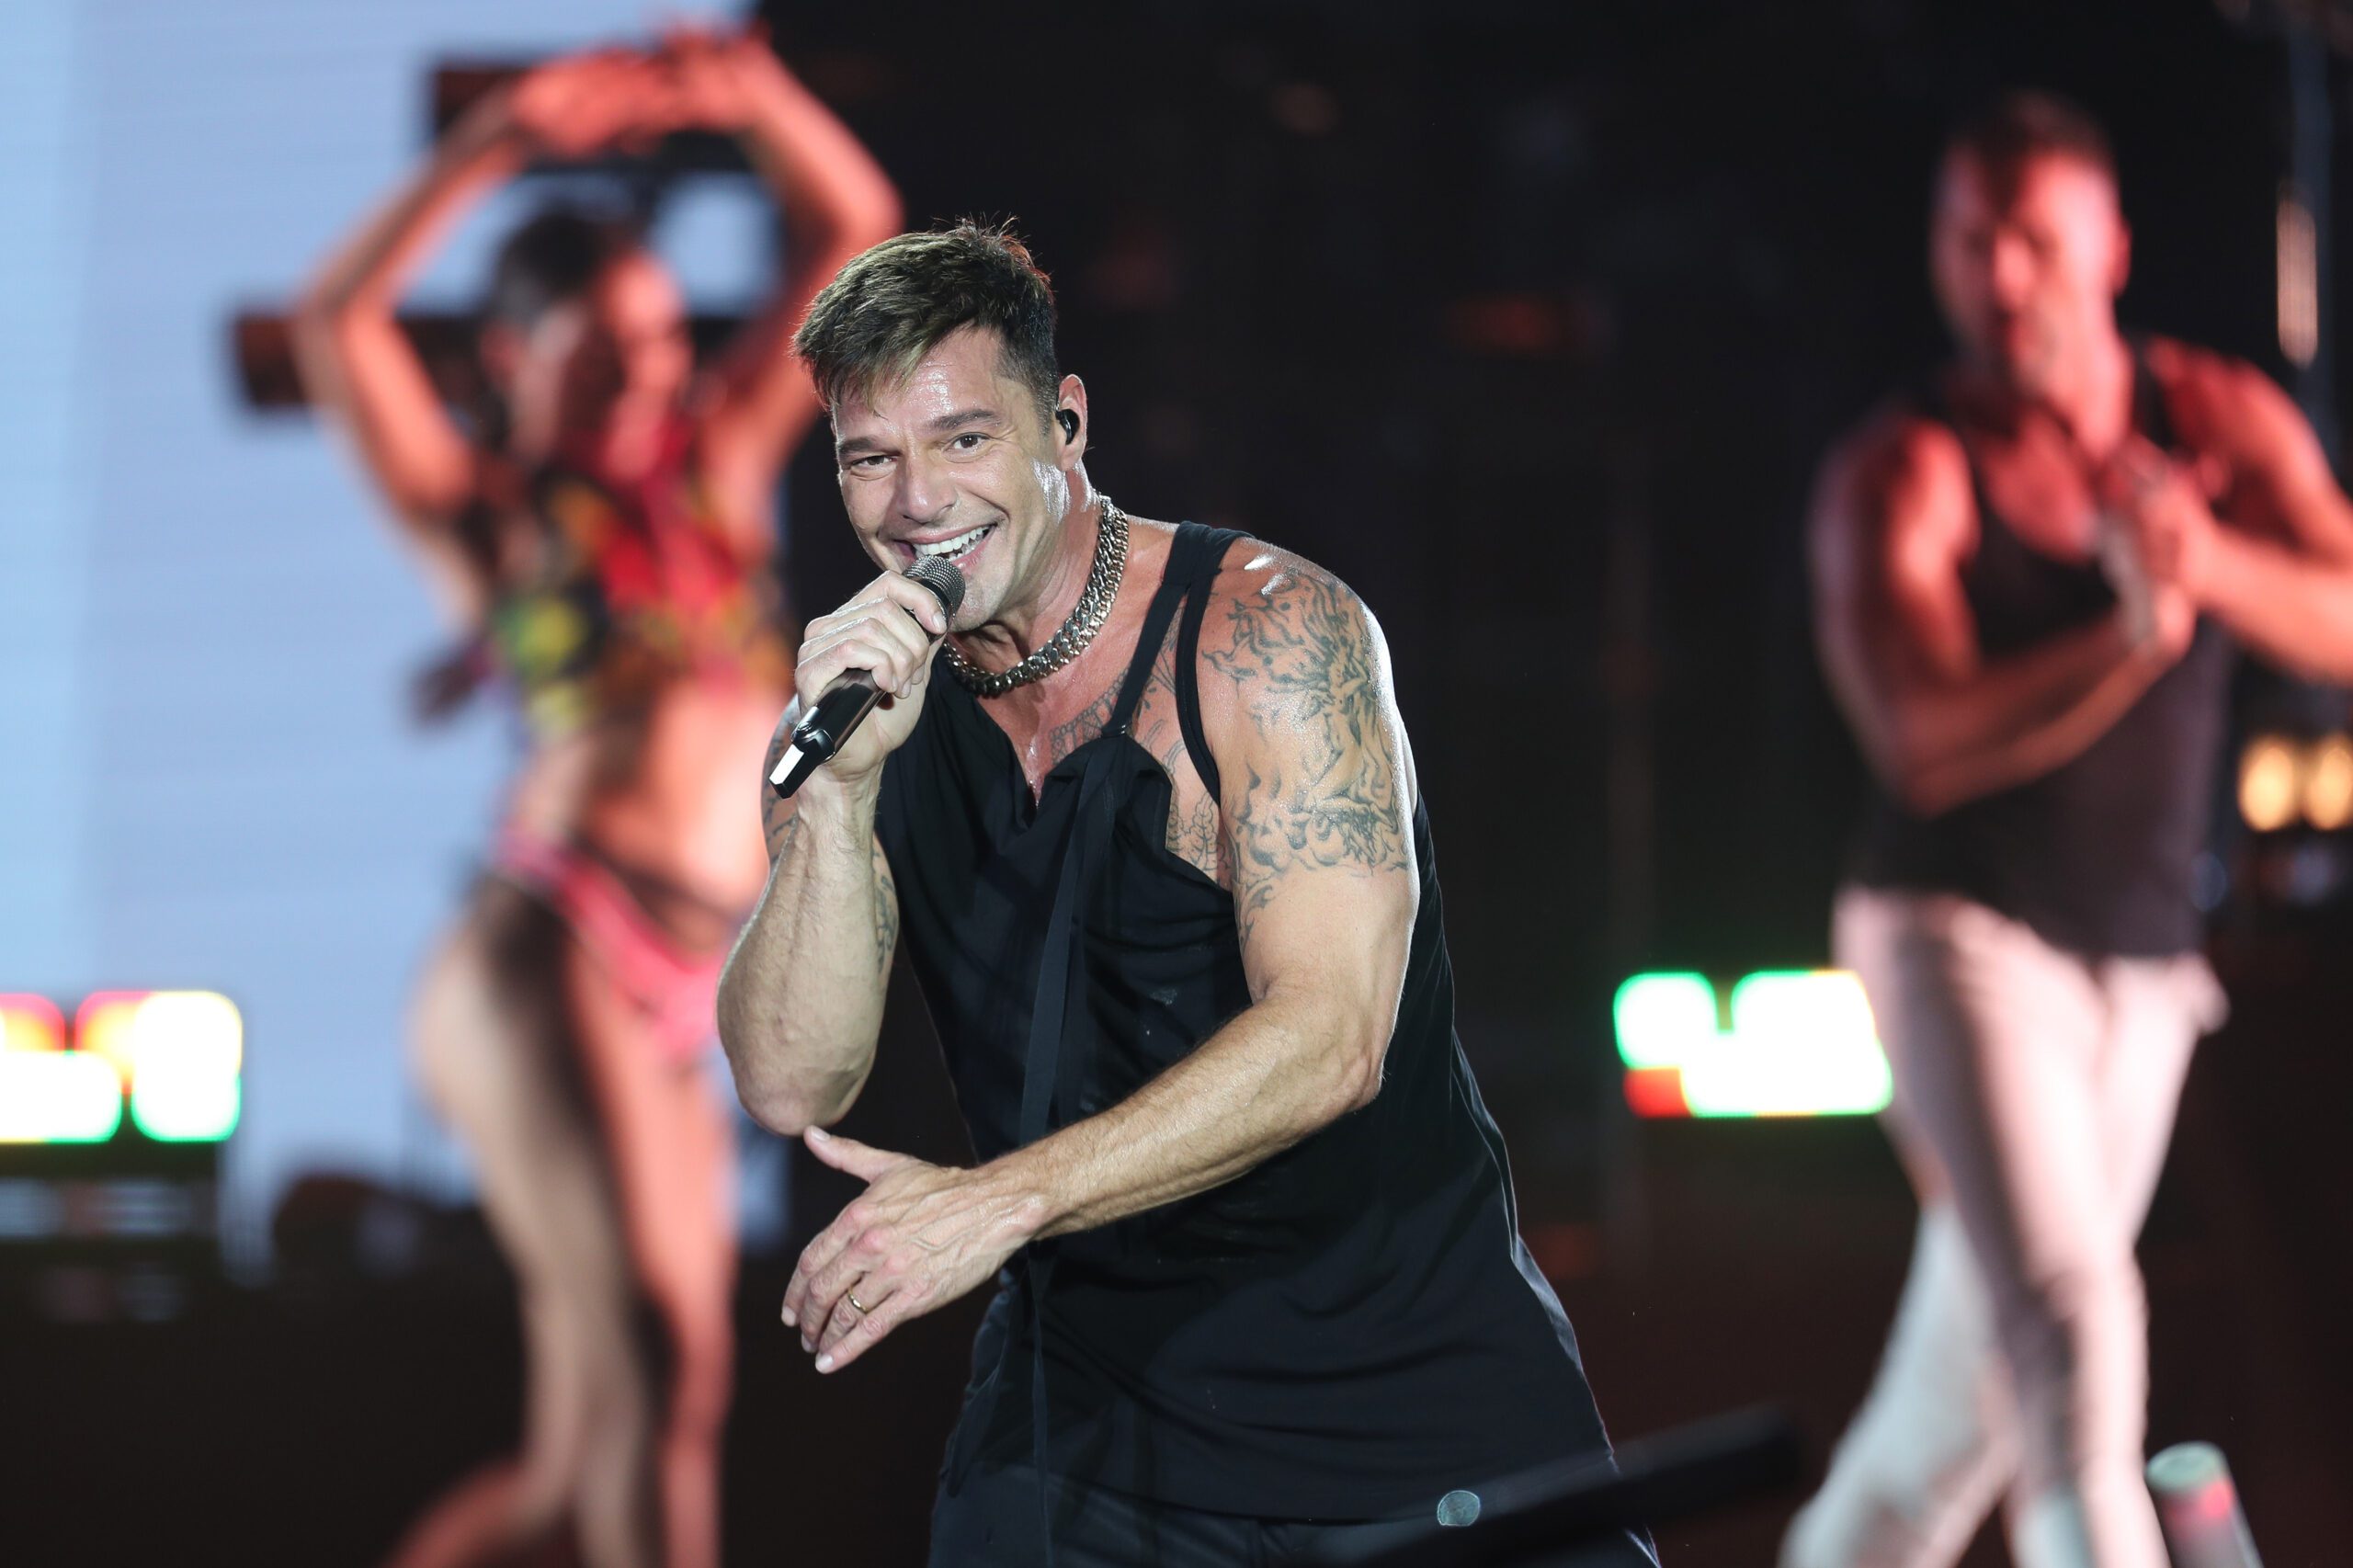 You are currently viewing Ricky Martin’s sizzling backup dancers are livin’ la vida loca & making everyone lose their breath